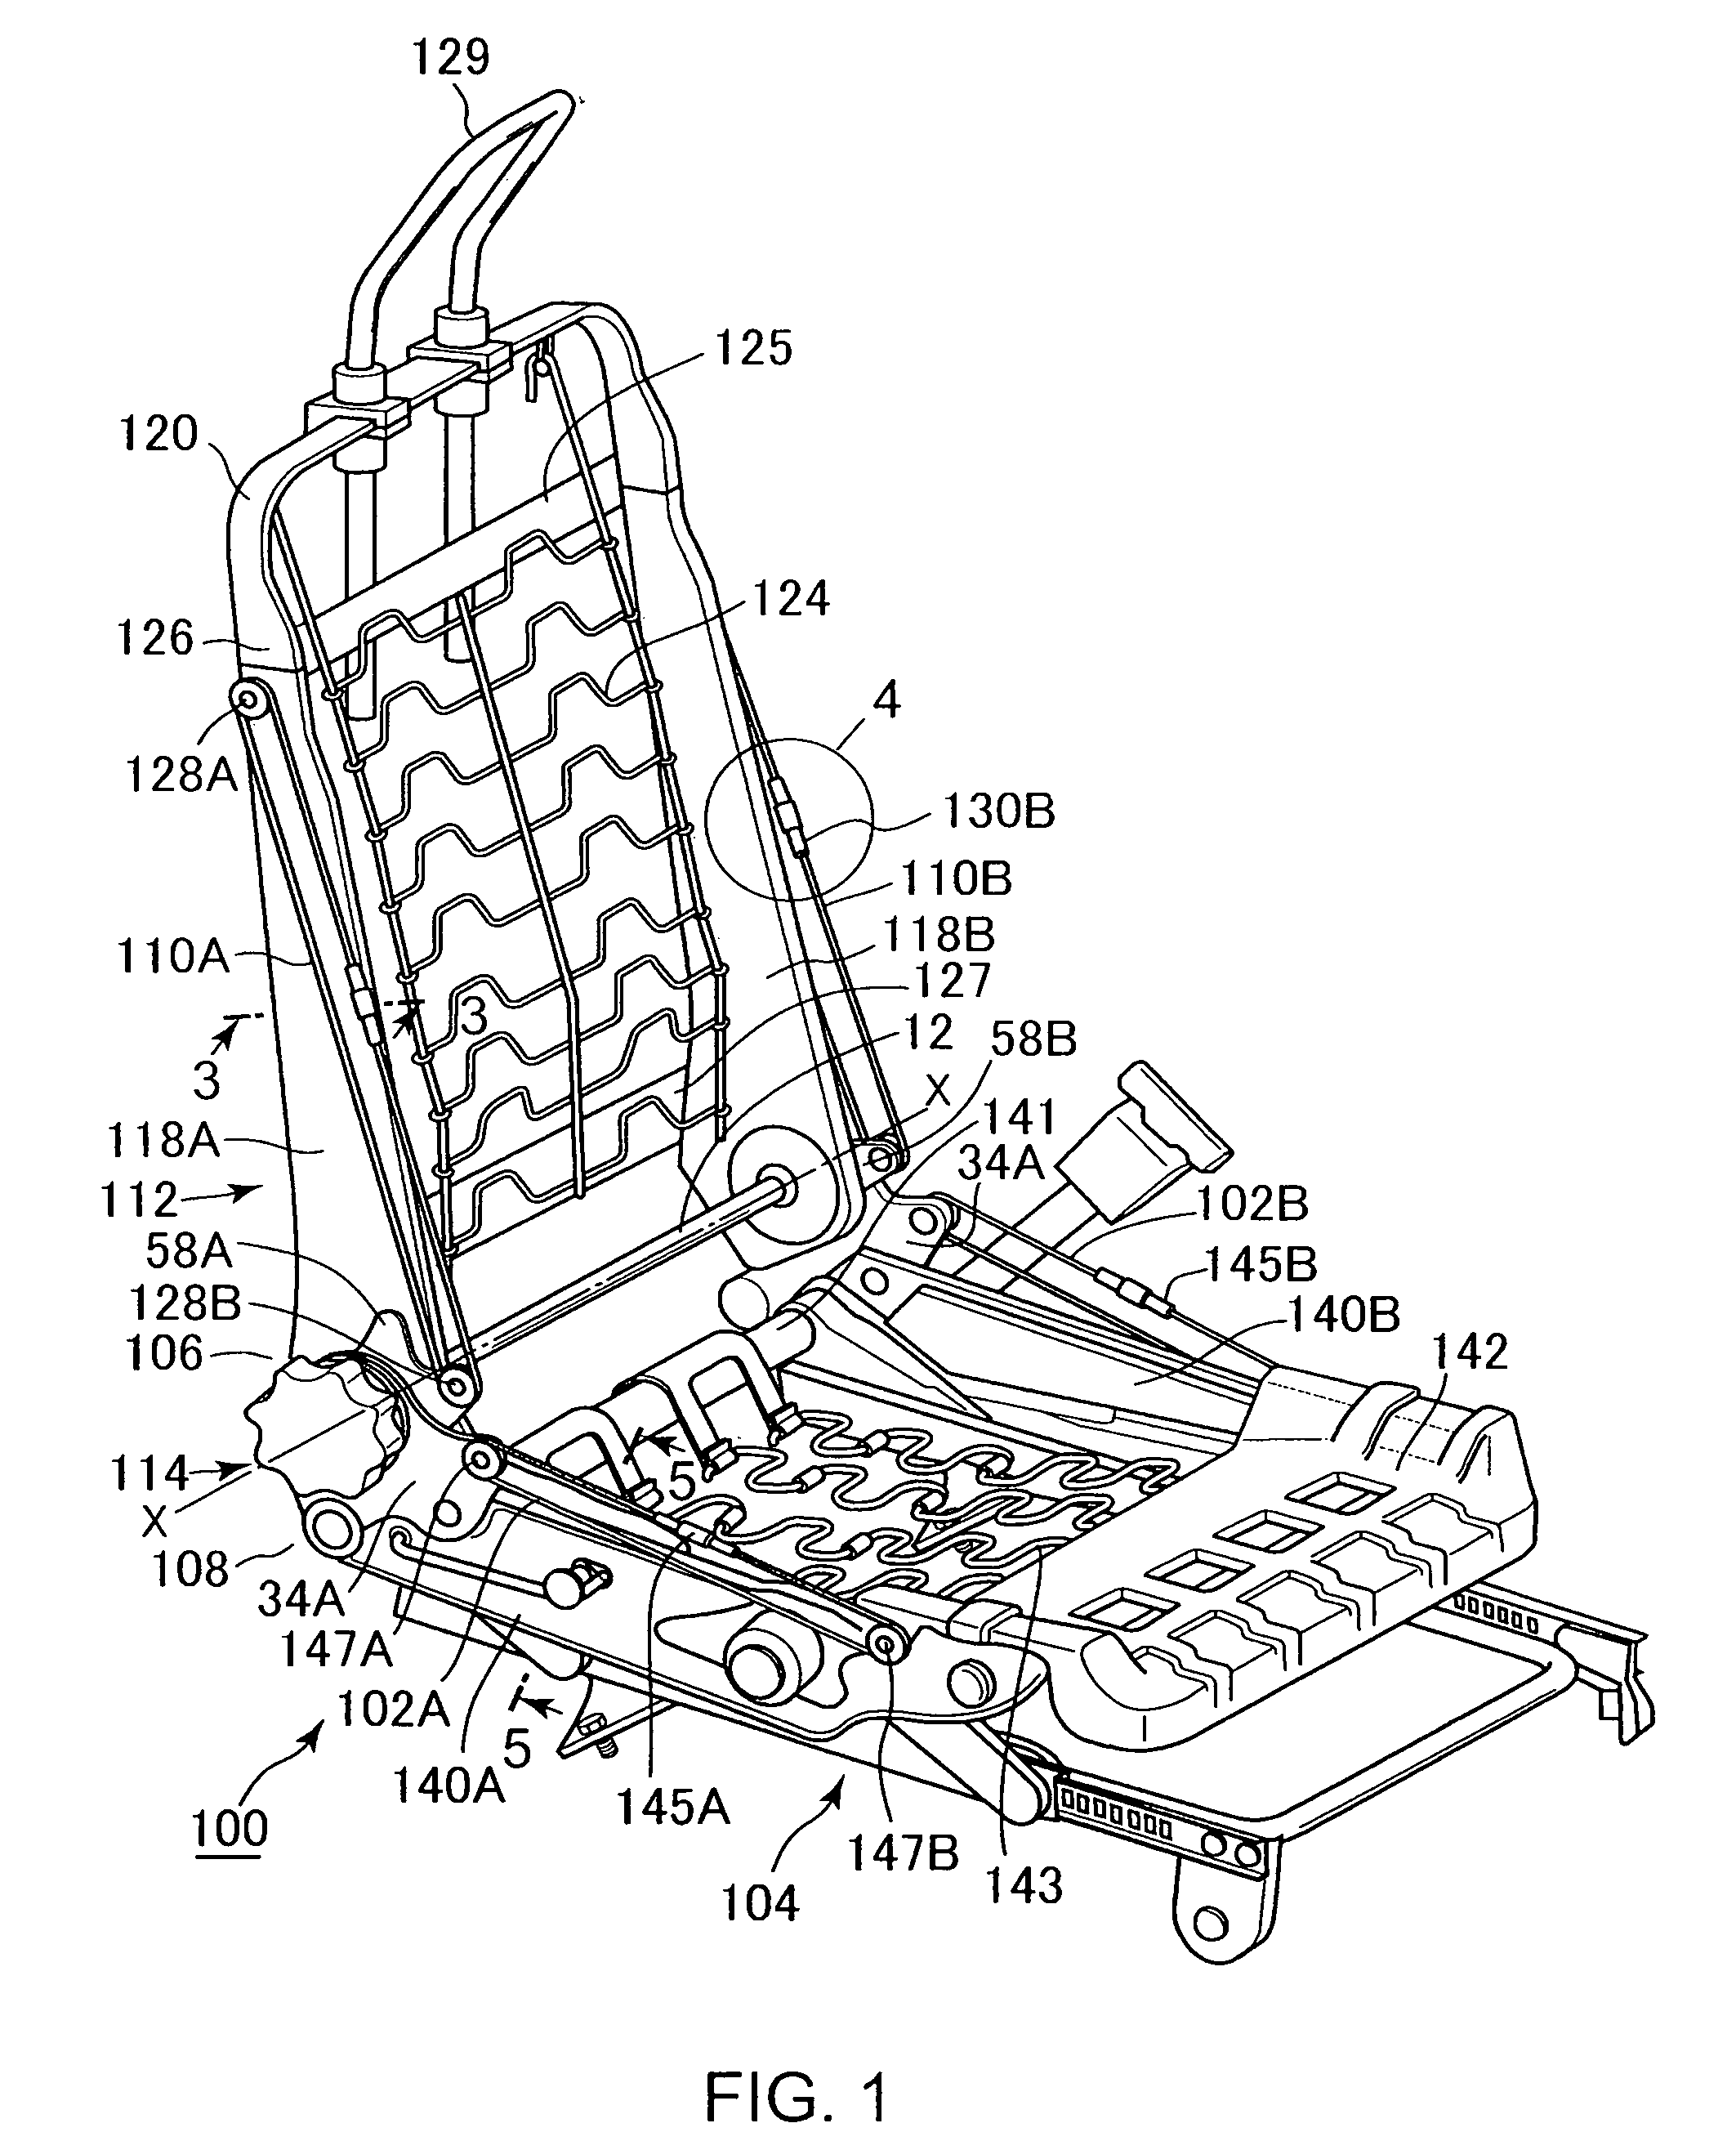 Seat cushion frame structure of seat for vehicle and seat for vehicle with seat cushion frame structure